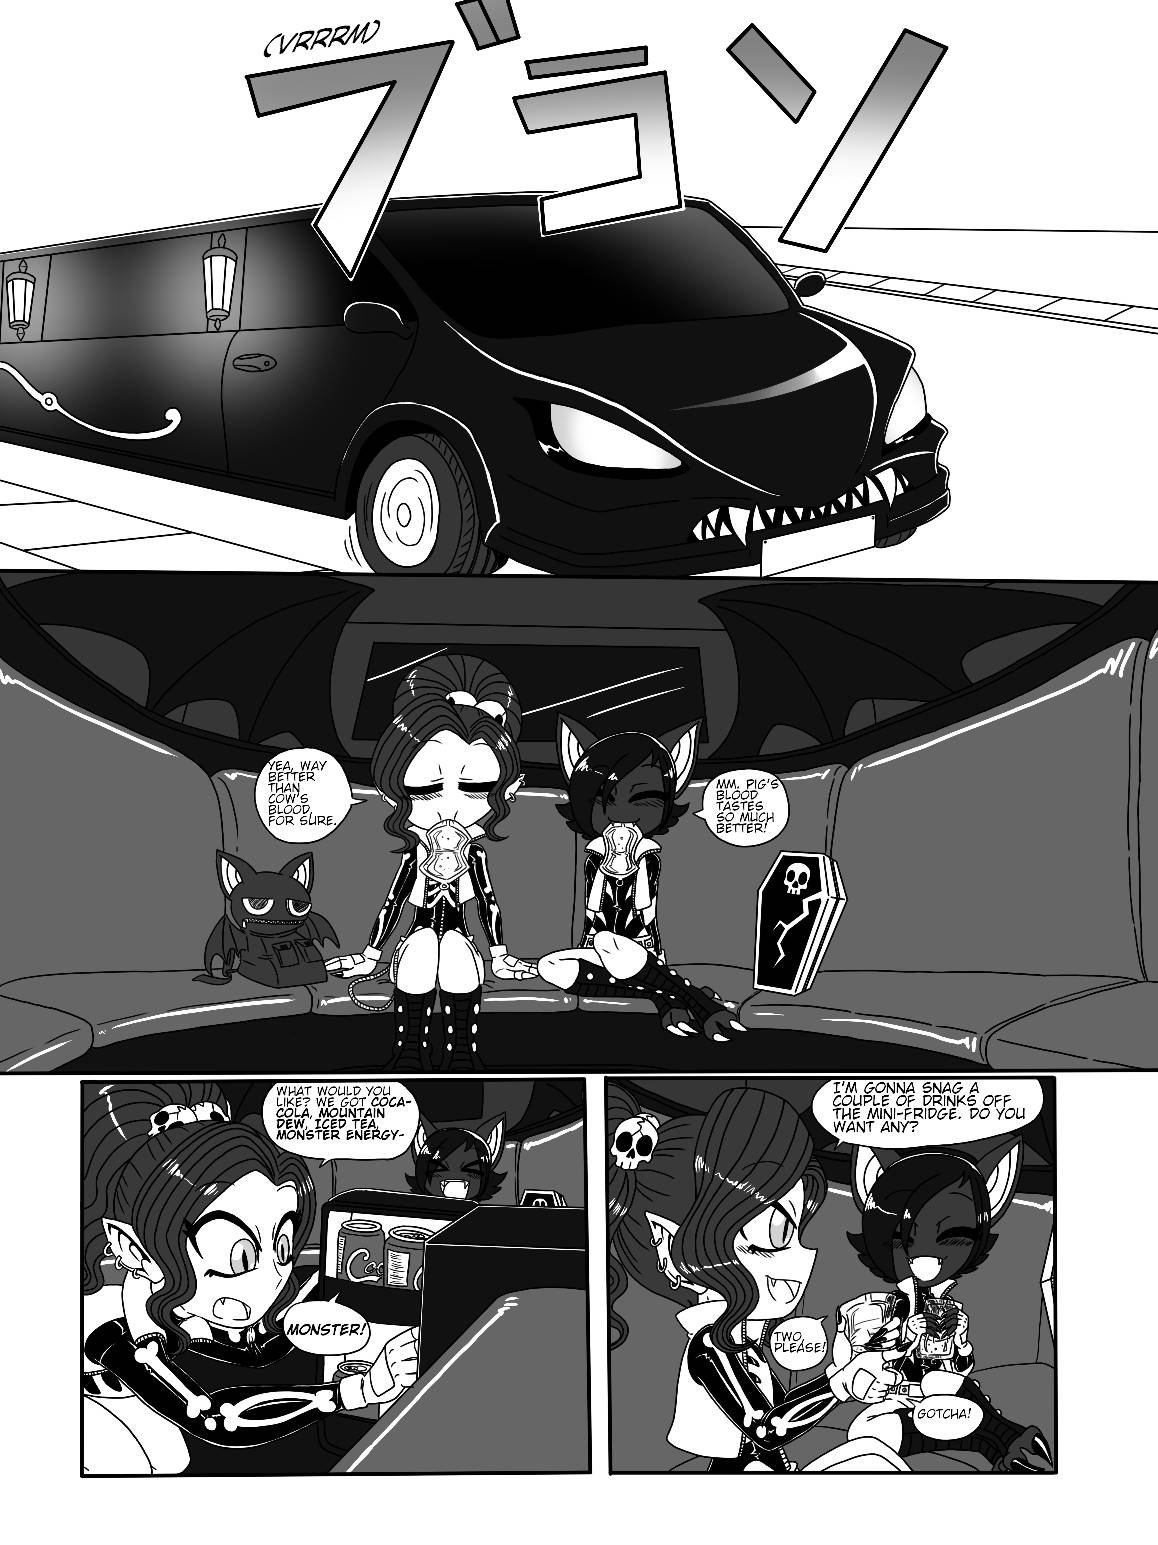 Back to School - Chapter 1 - Page 7 by PlayboyVampire on DeviantArt